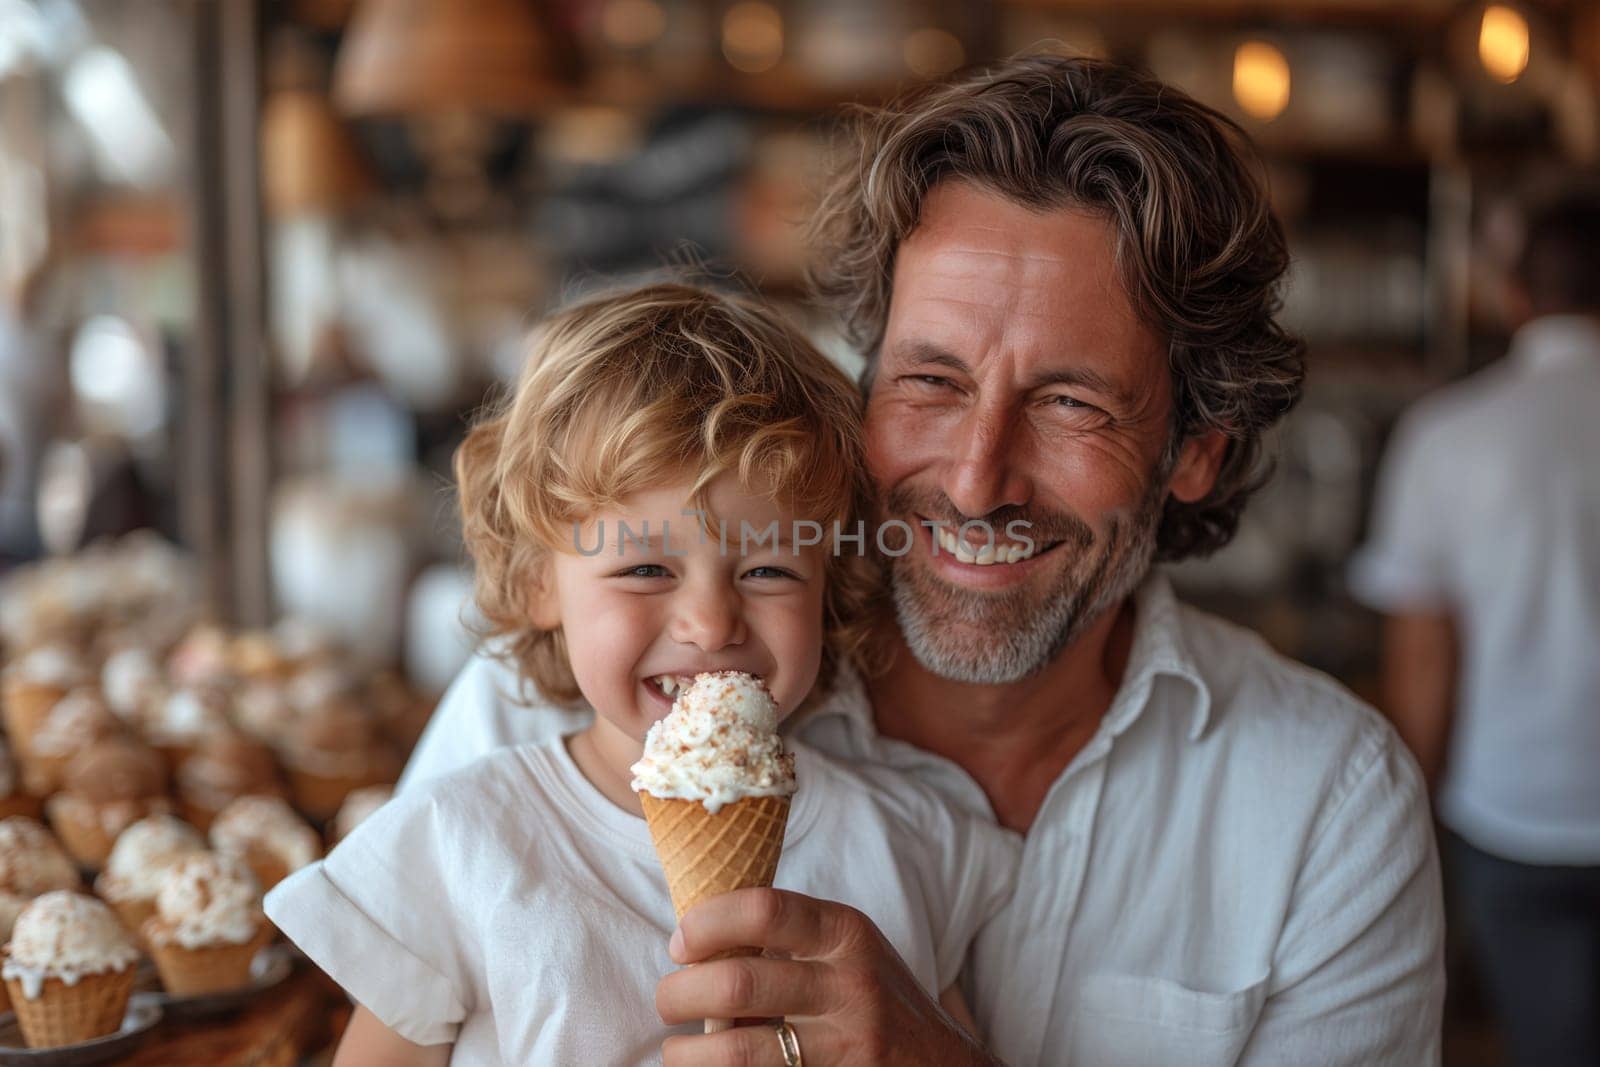 Father and son sharing ice cream together. Close-up.